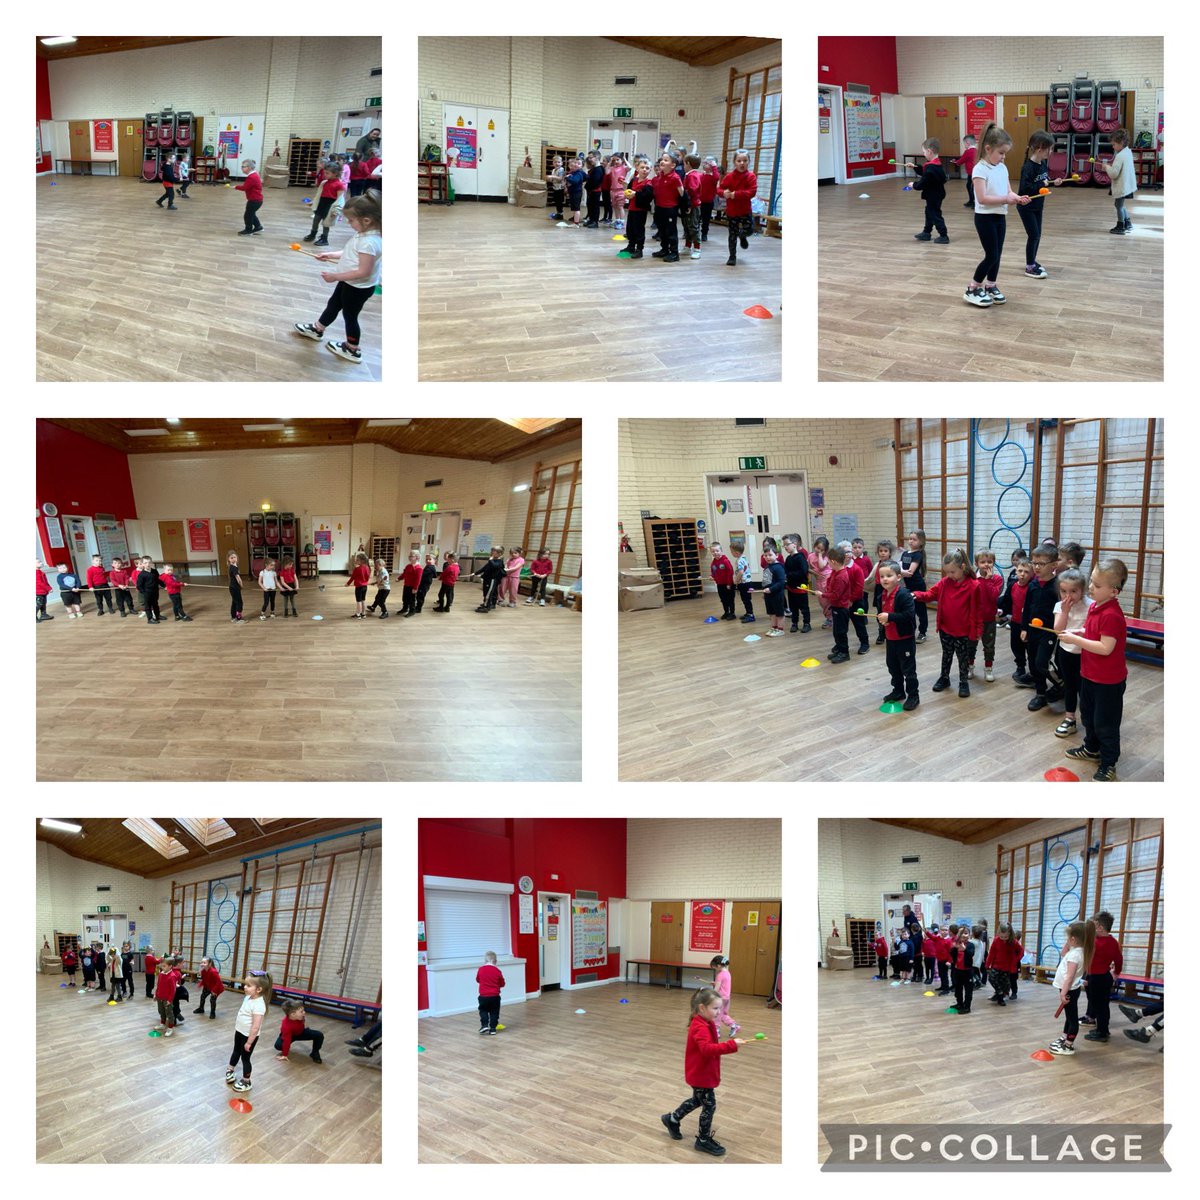 Yesterday pupils in reception enjoyed their first PE lesson where they practised a range of skills in preparation for sports day 🥇🥈🥉@NantYParcSchool